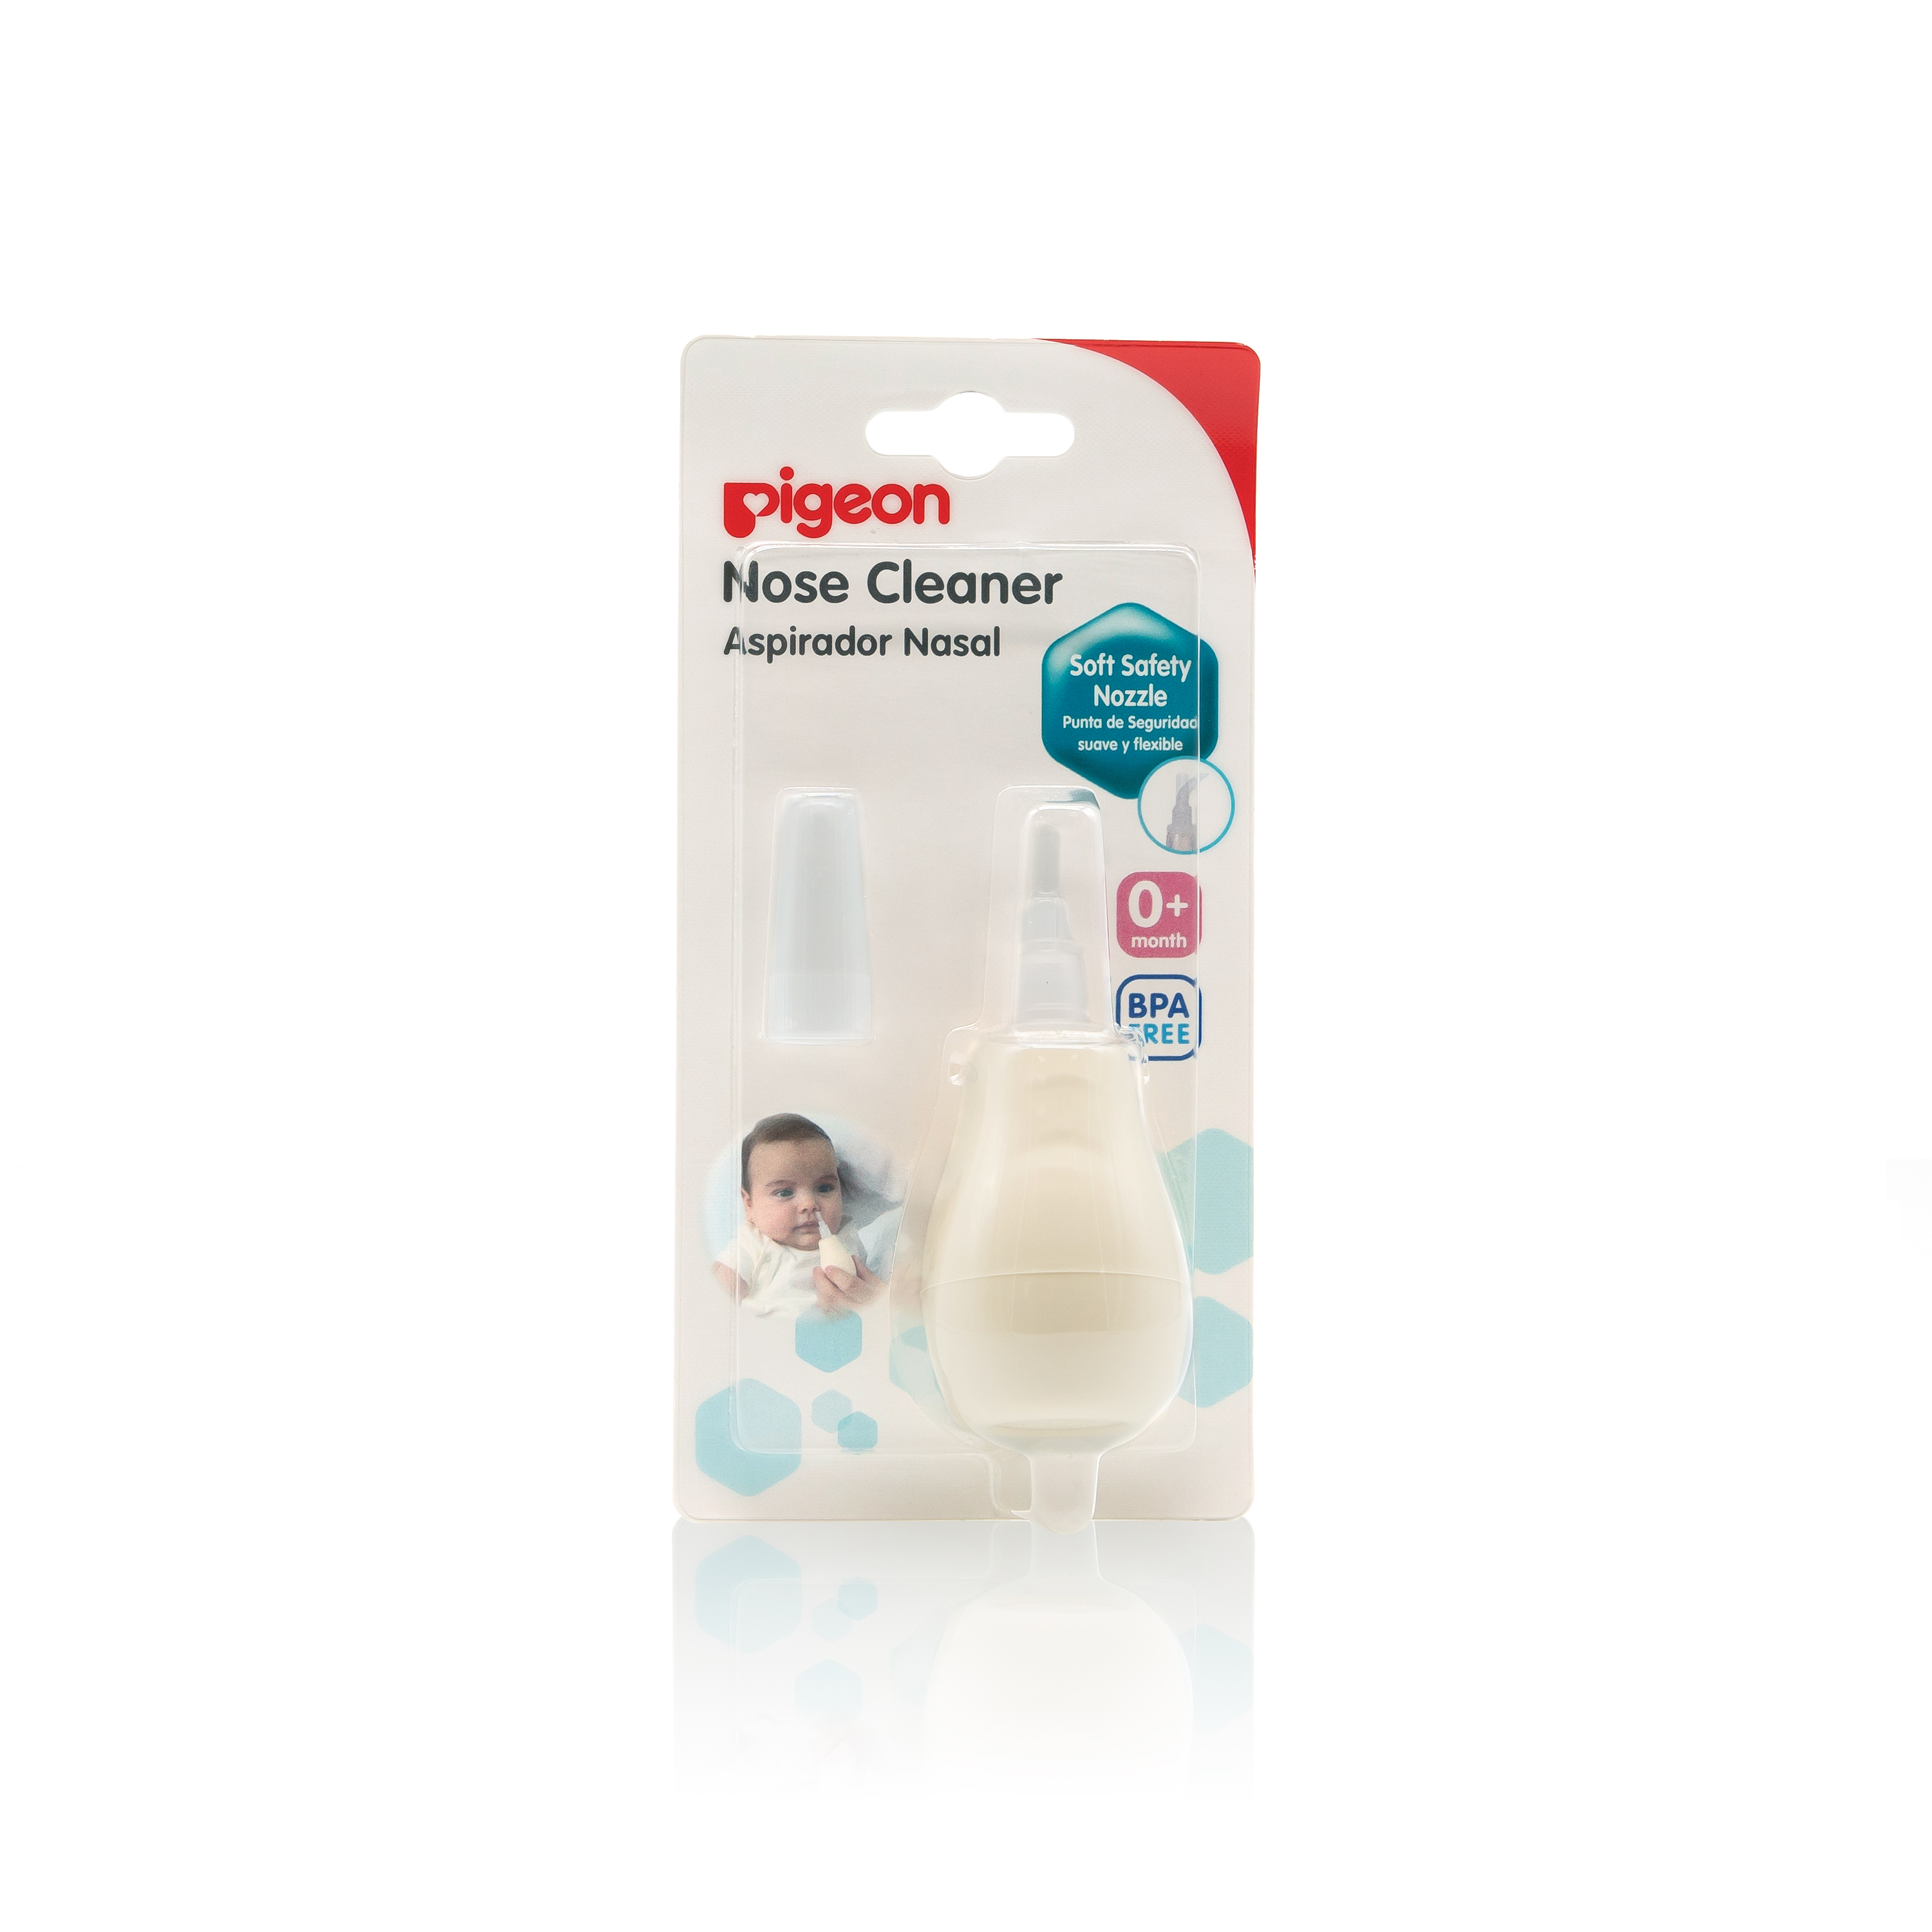 Pigeon Nose Cleaner Blister Pack (PG-78477)